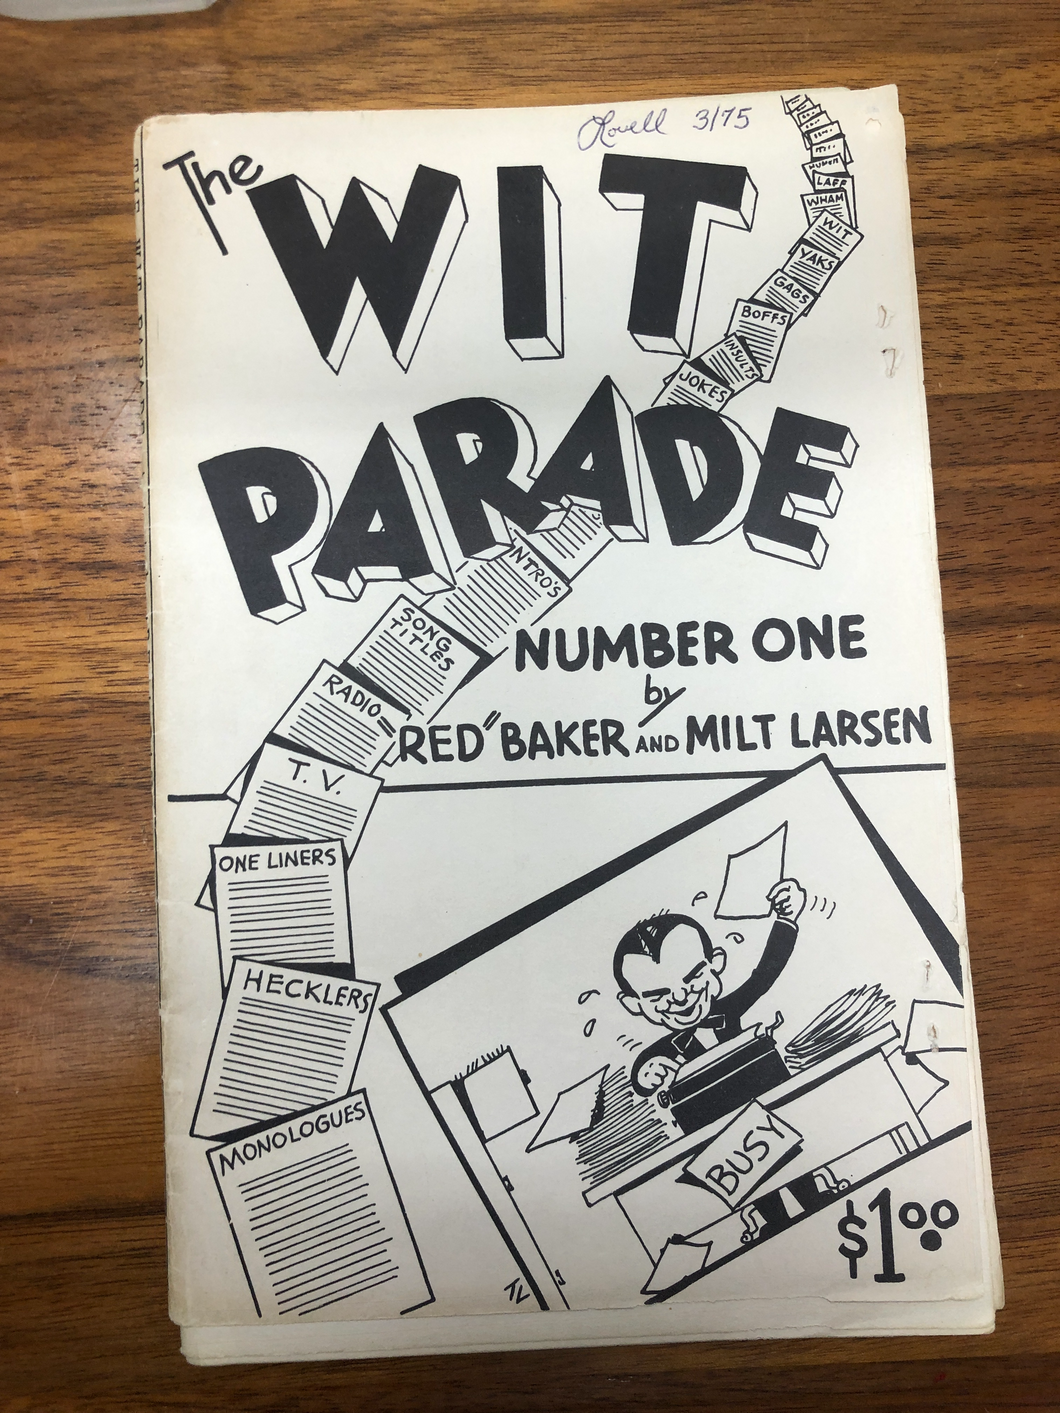 The Wit Parade Number One By Red Baker And Milt Larsen